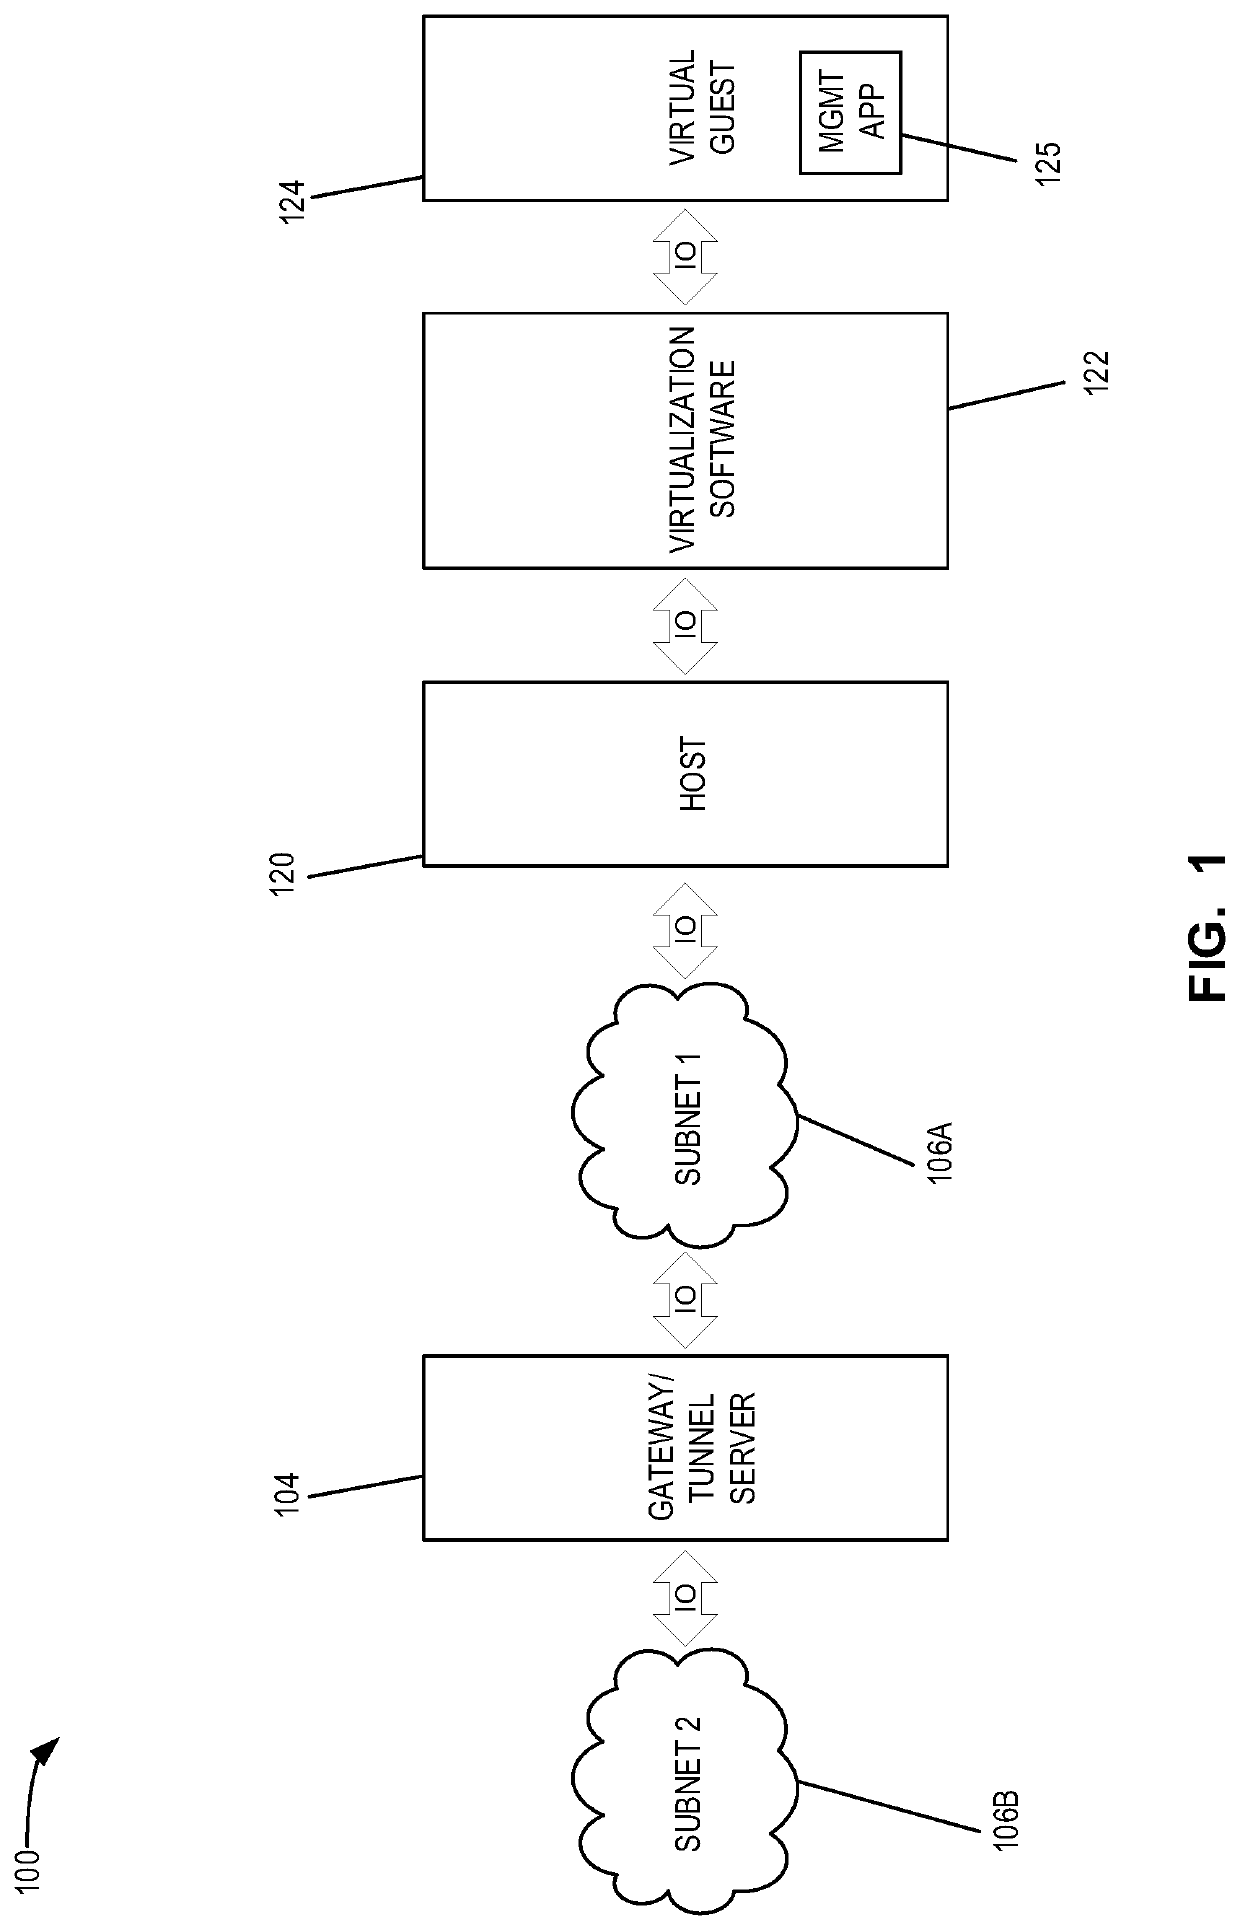 Method and system for creating quarantined workspaces through controlled interaction between a host and virtual guests